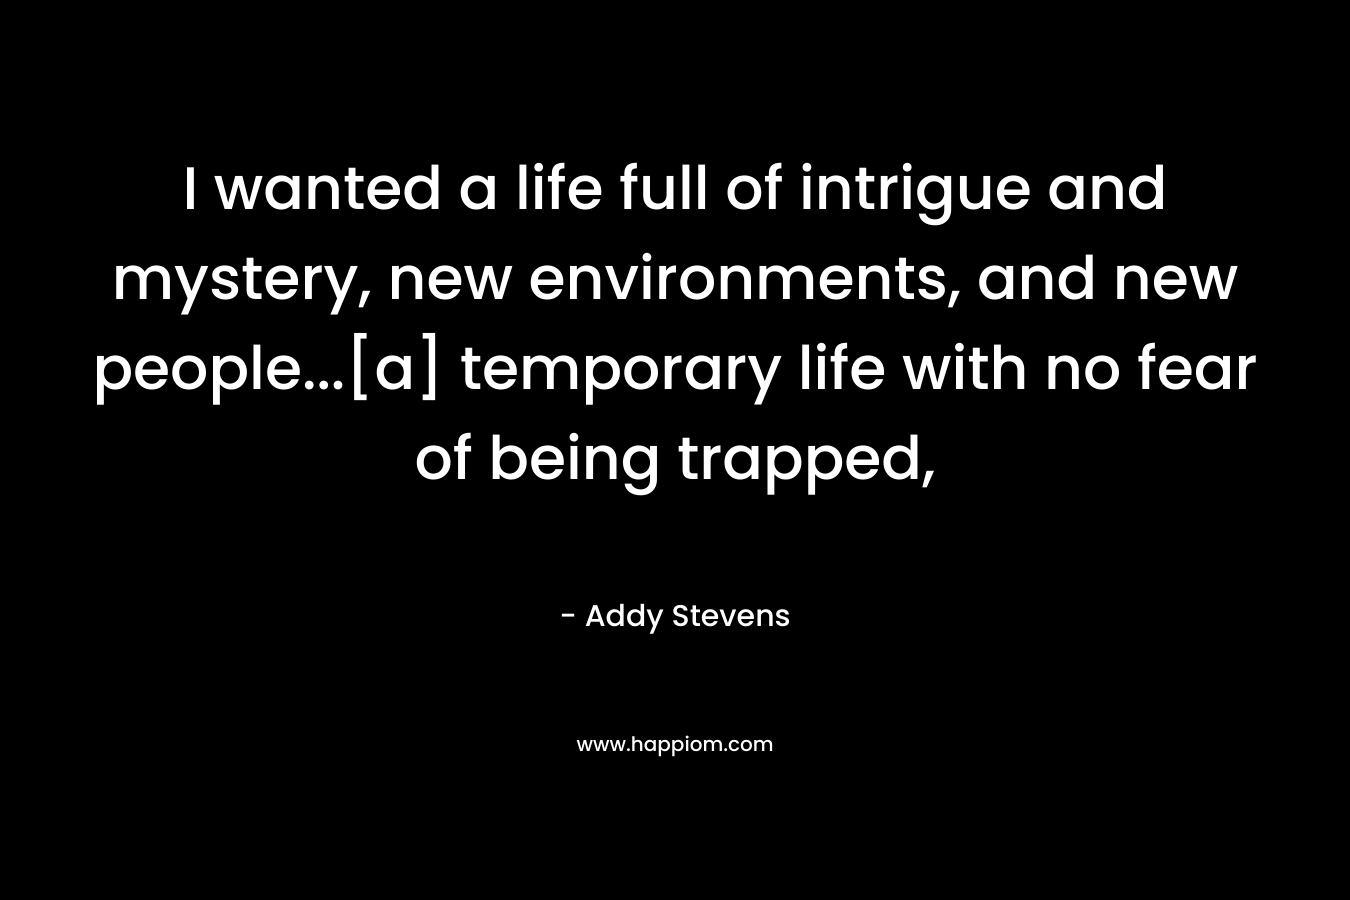 I wanted a life full of intrigue and mystery, new environments, and new people...[a] temporary life with no fear of being trapped,